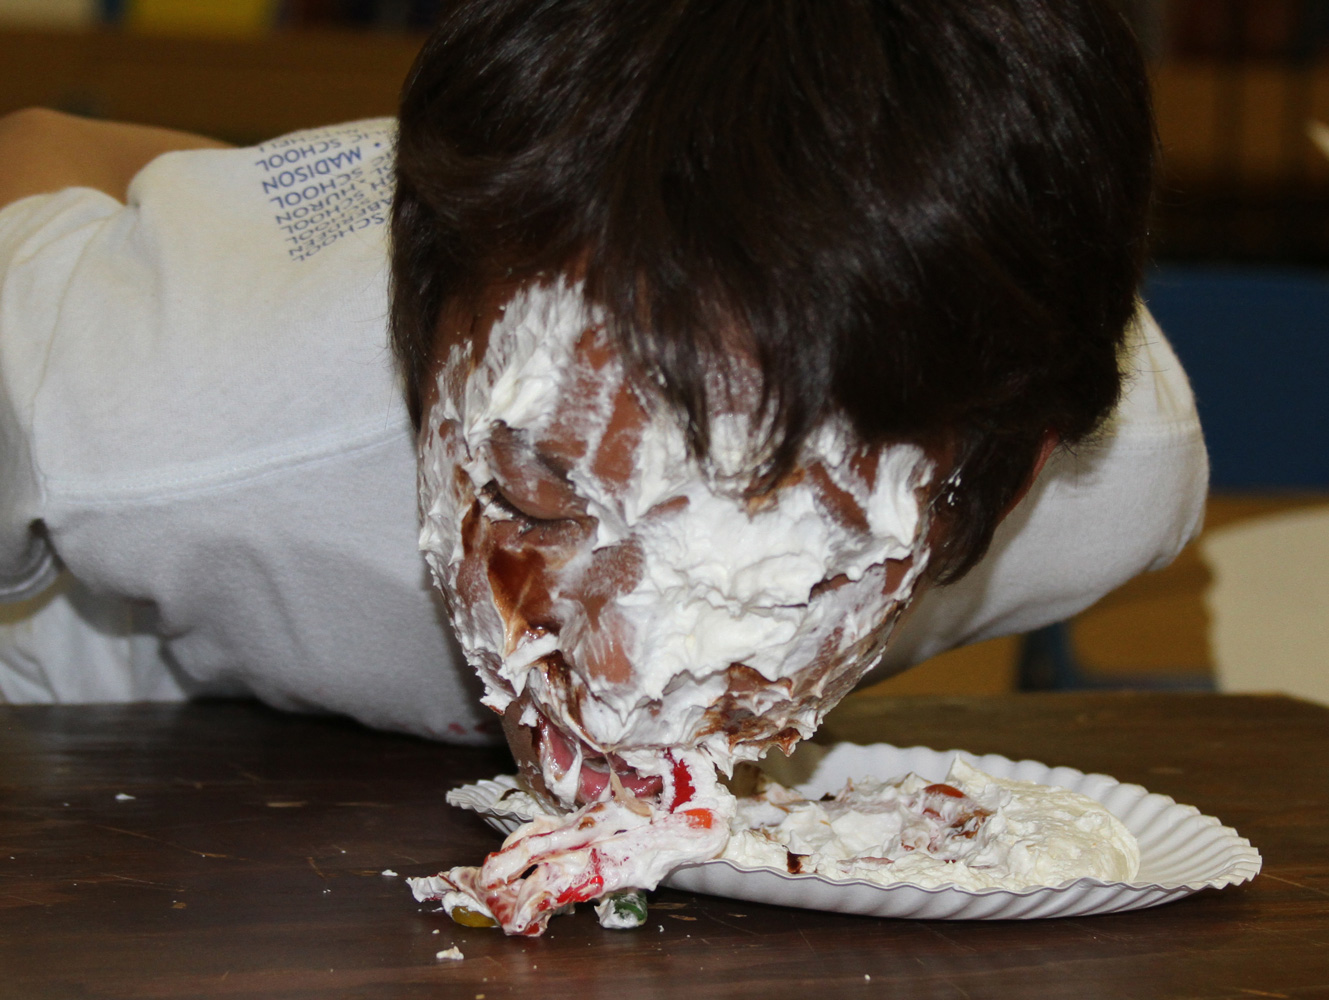 On field day, students fished for gummy worms in a plate of whipped cream and chocolate sauce – no hands! 